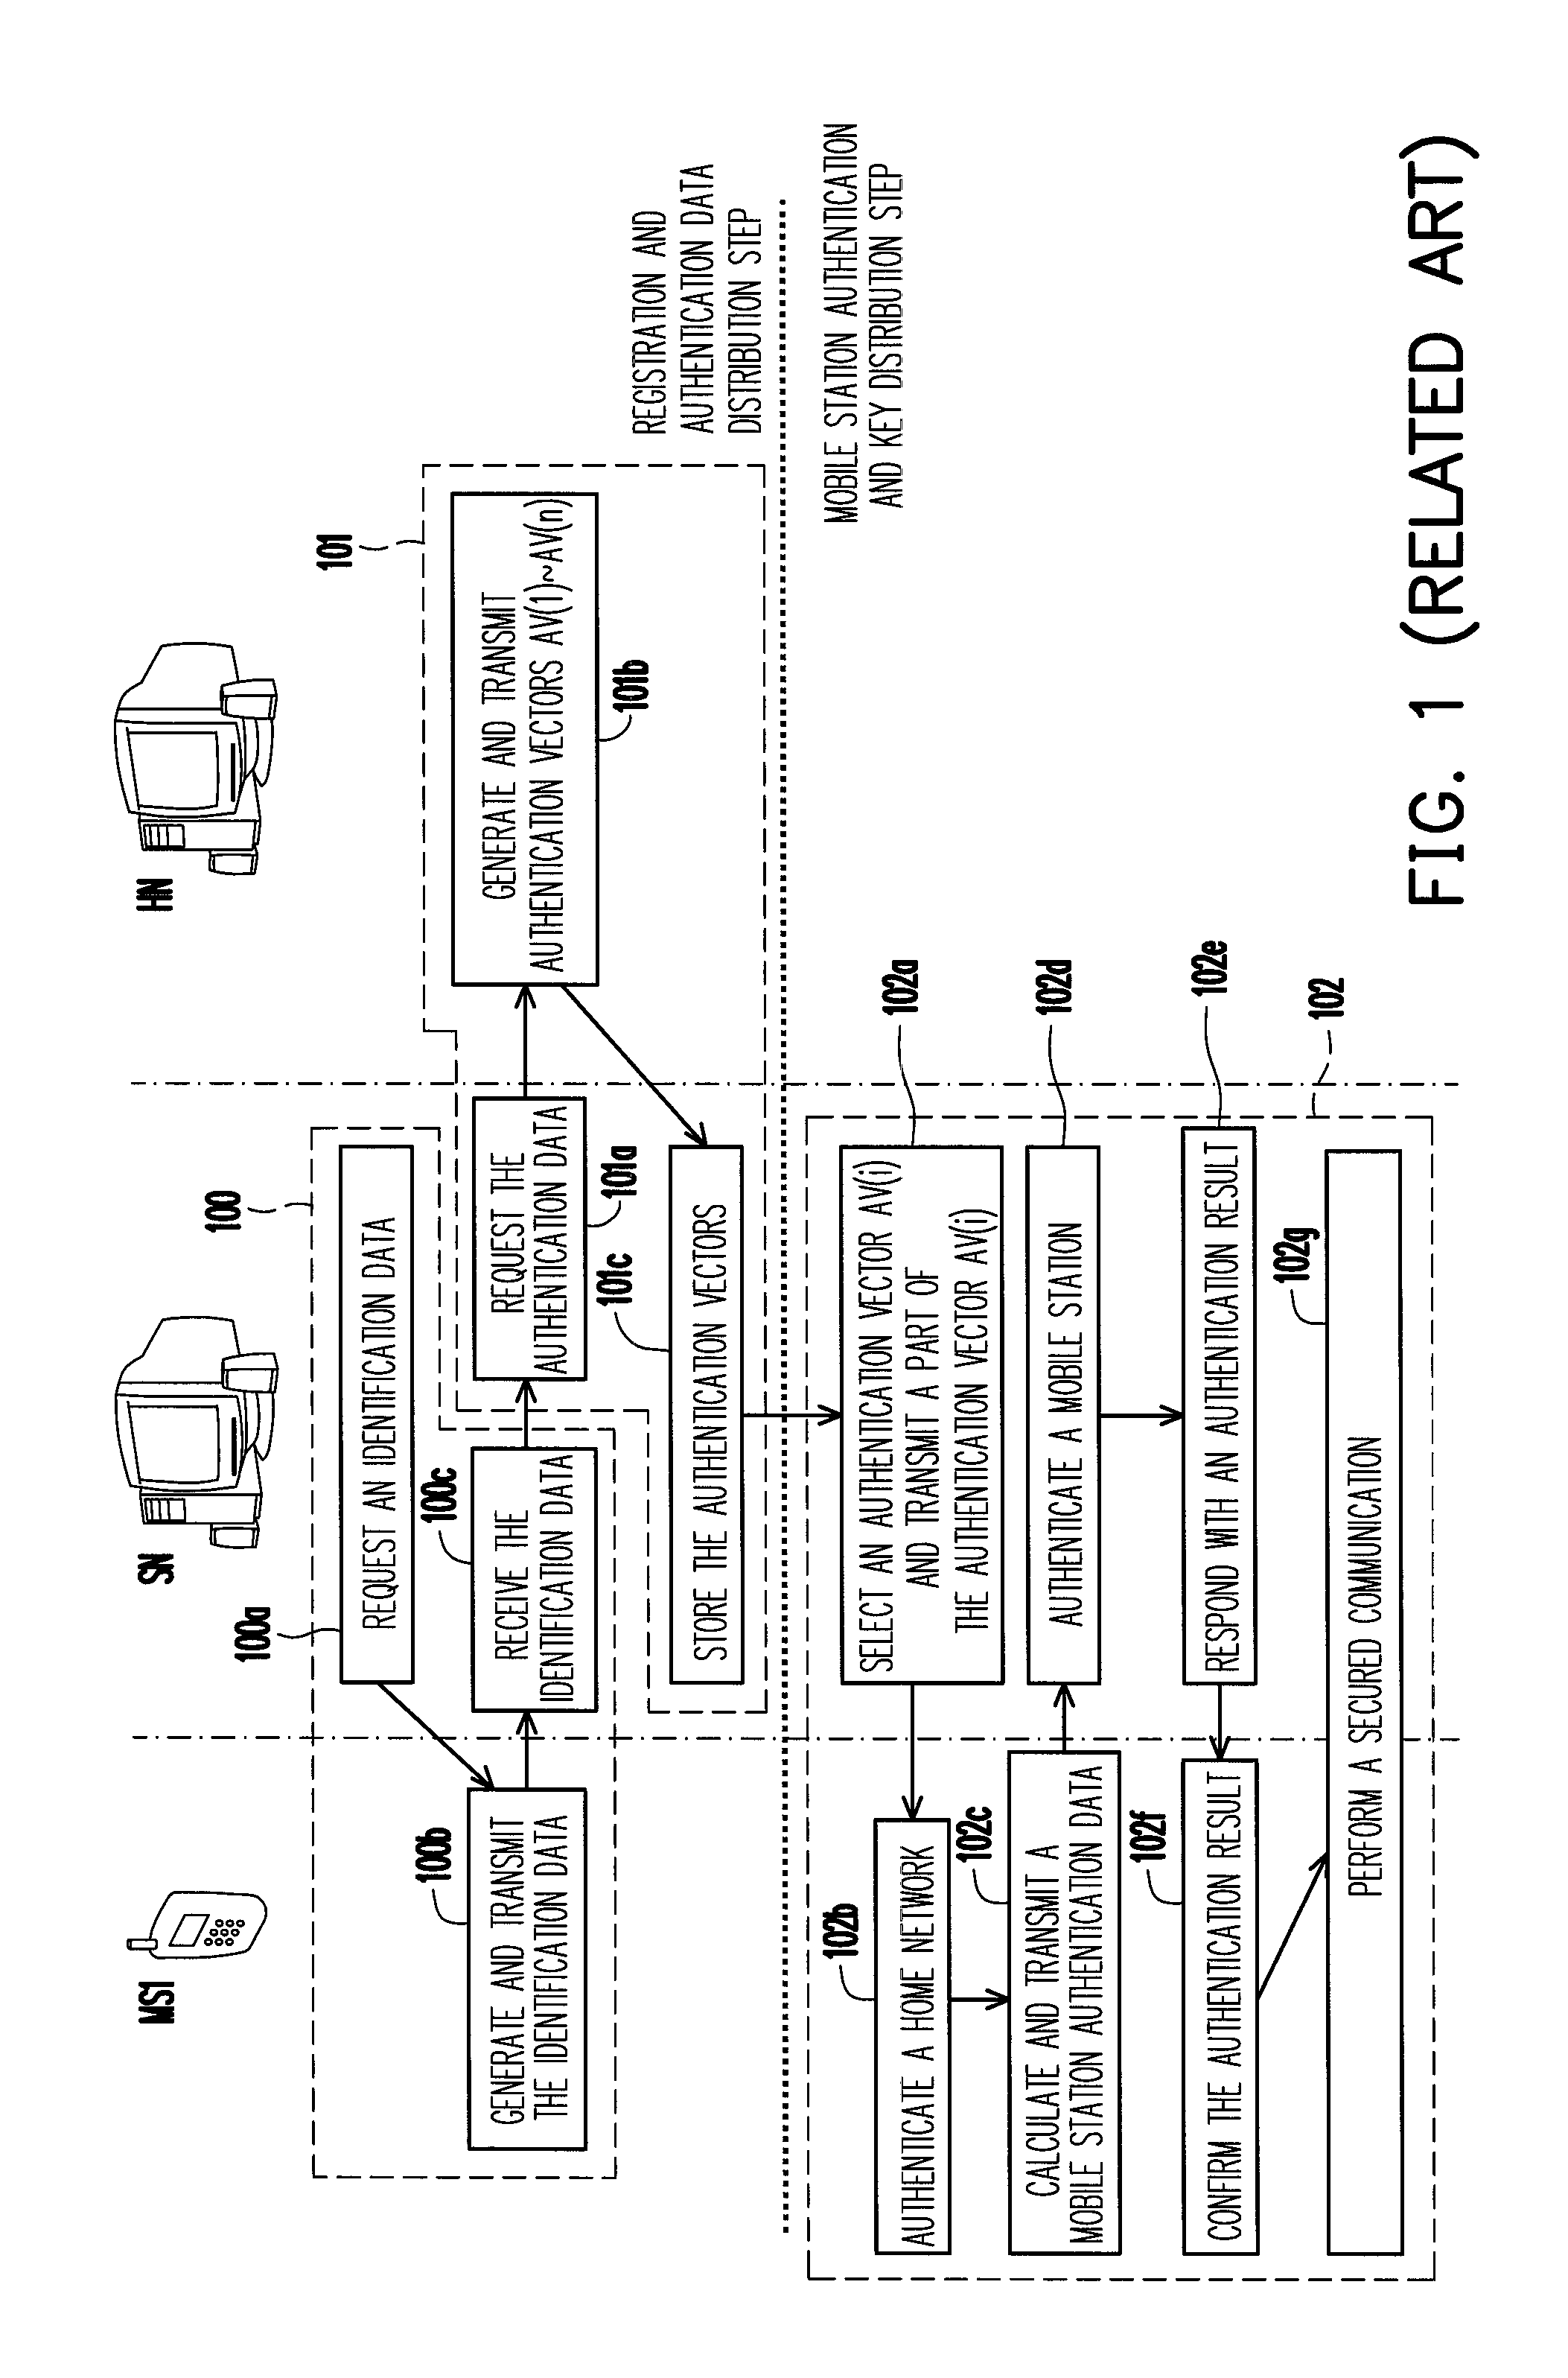 Group authentication method